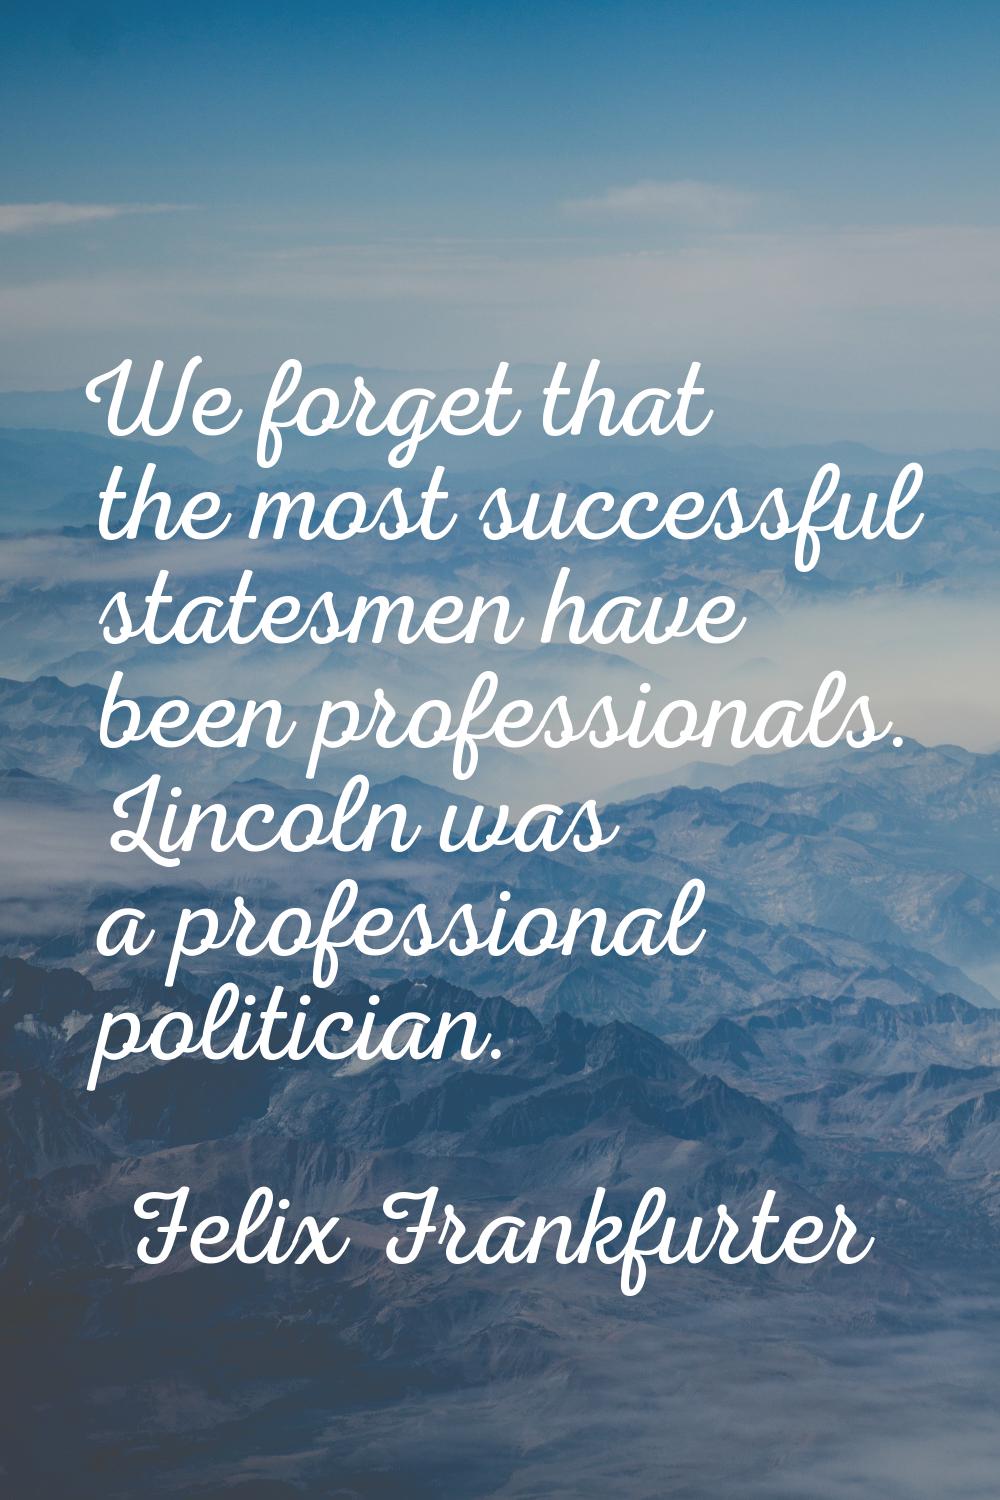 We forget that the most successful statesmen have been professionals. Lincoln was a professional po